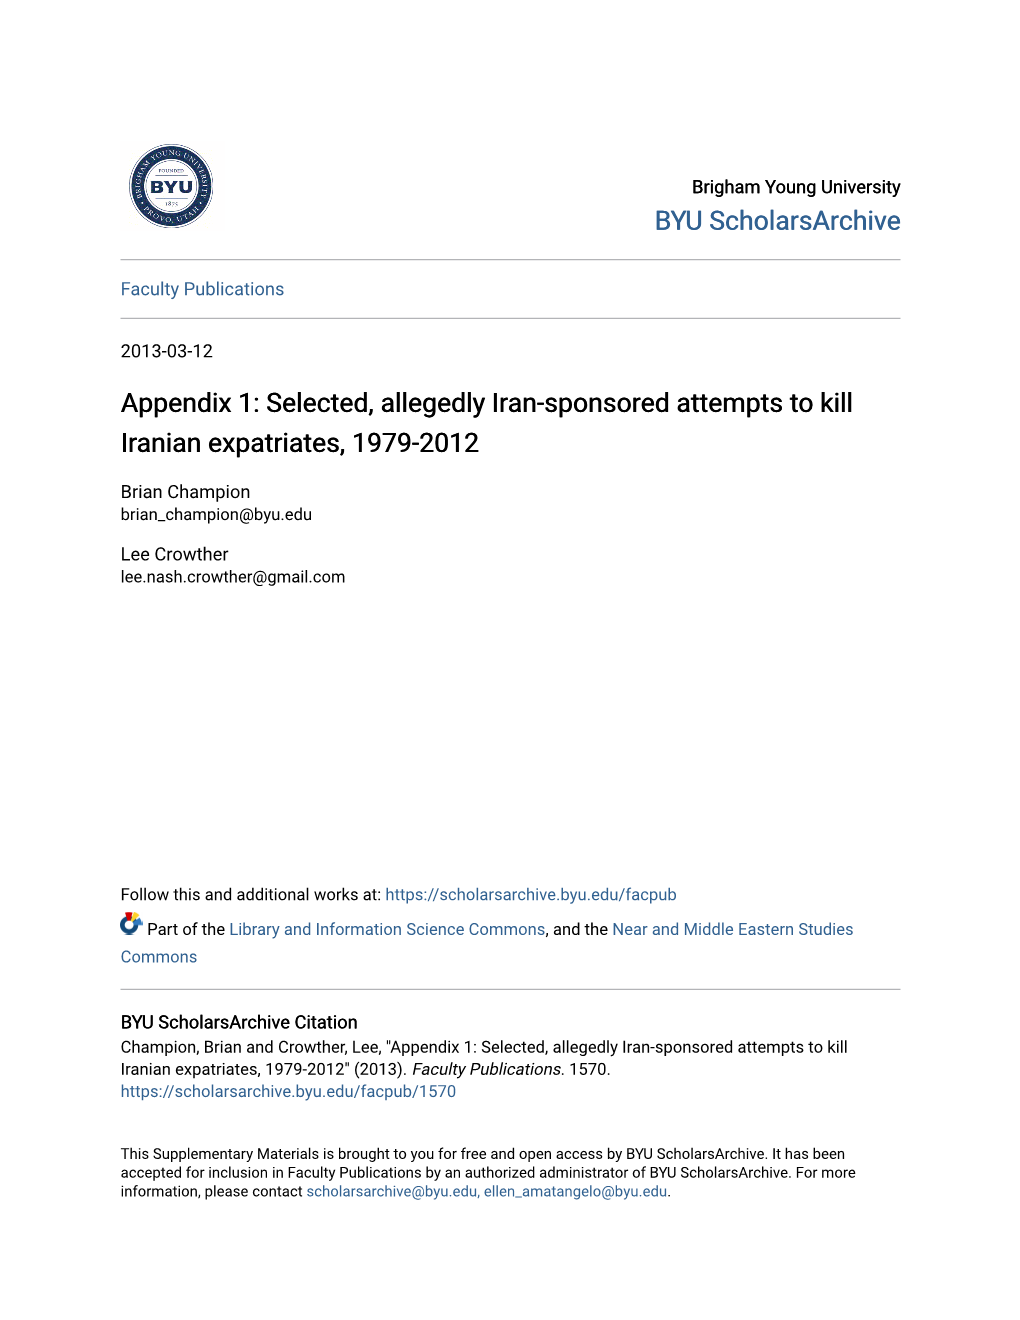 Selected, Allegedly Iran-Sponsored Attempts to Kill Iranian Expatriates, 1979-2012